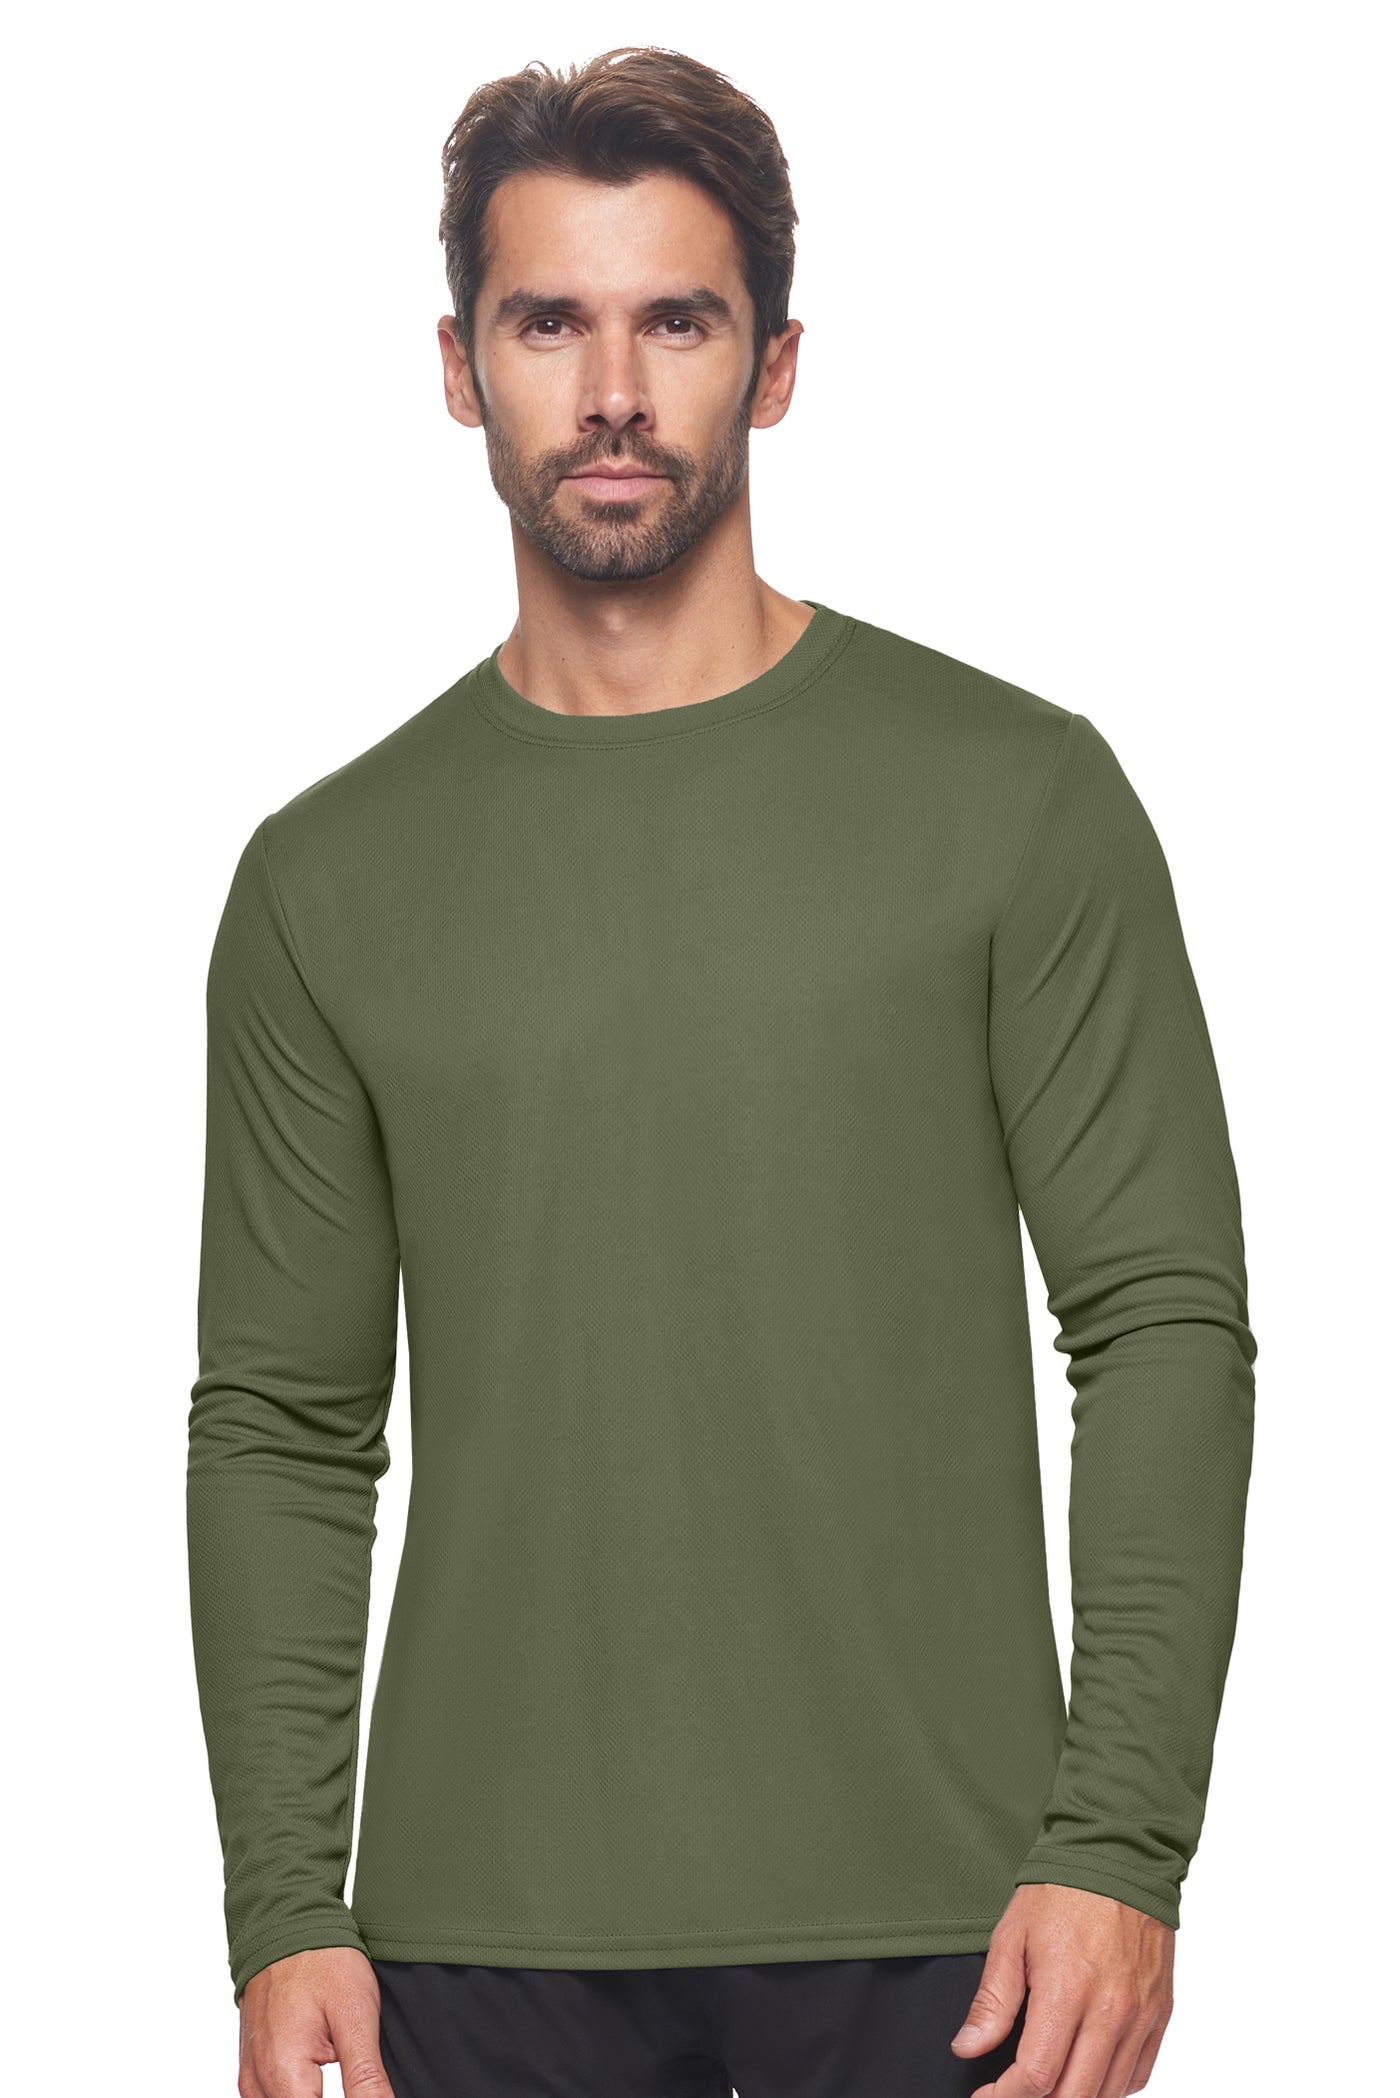 Expert Brand Apparel Men's Oxymesh Performance Long Sleeve Tec Tee Made in USA Military Green#color_military-green